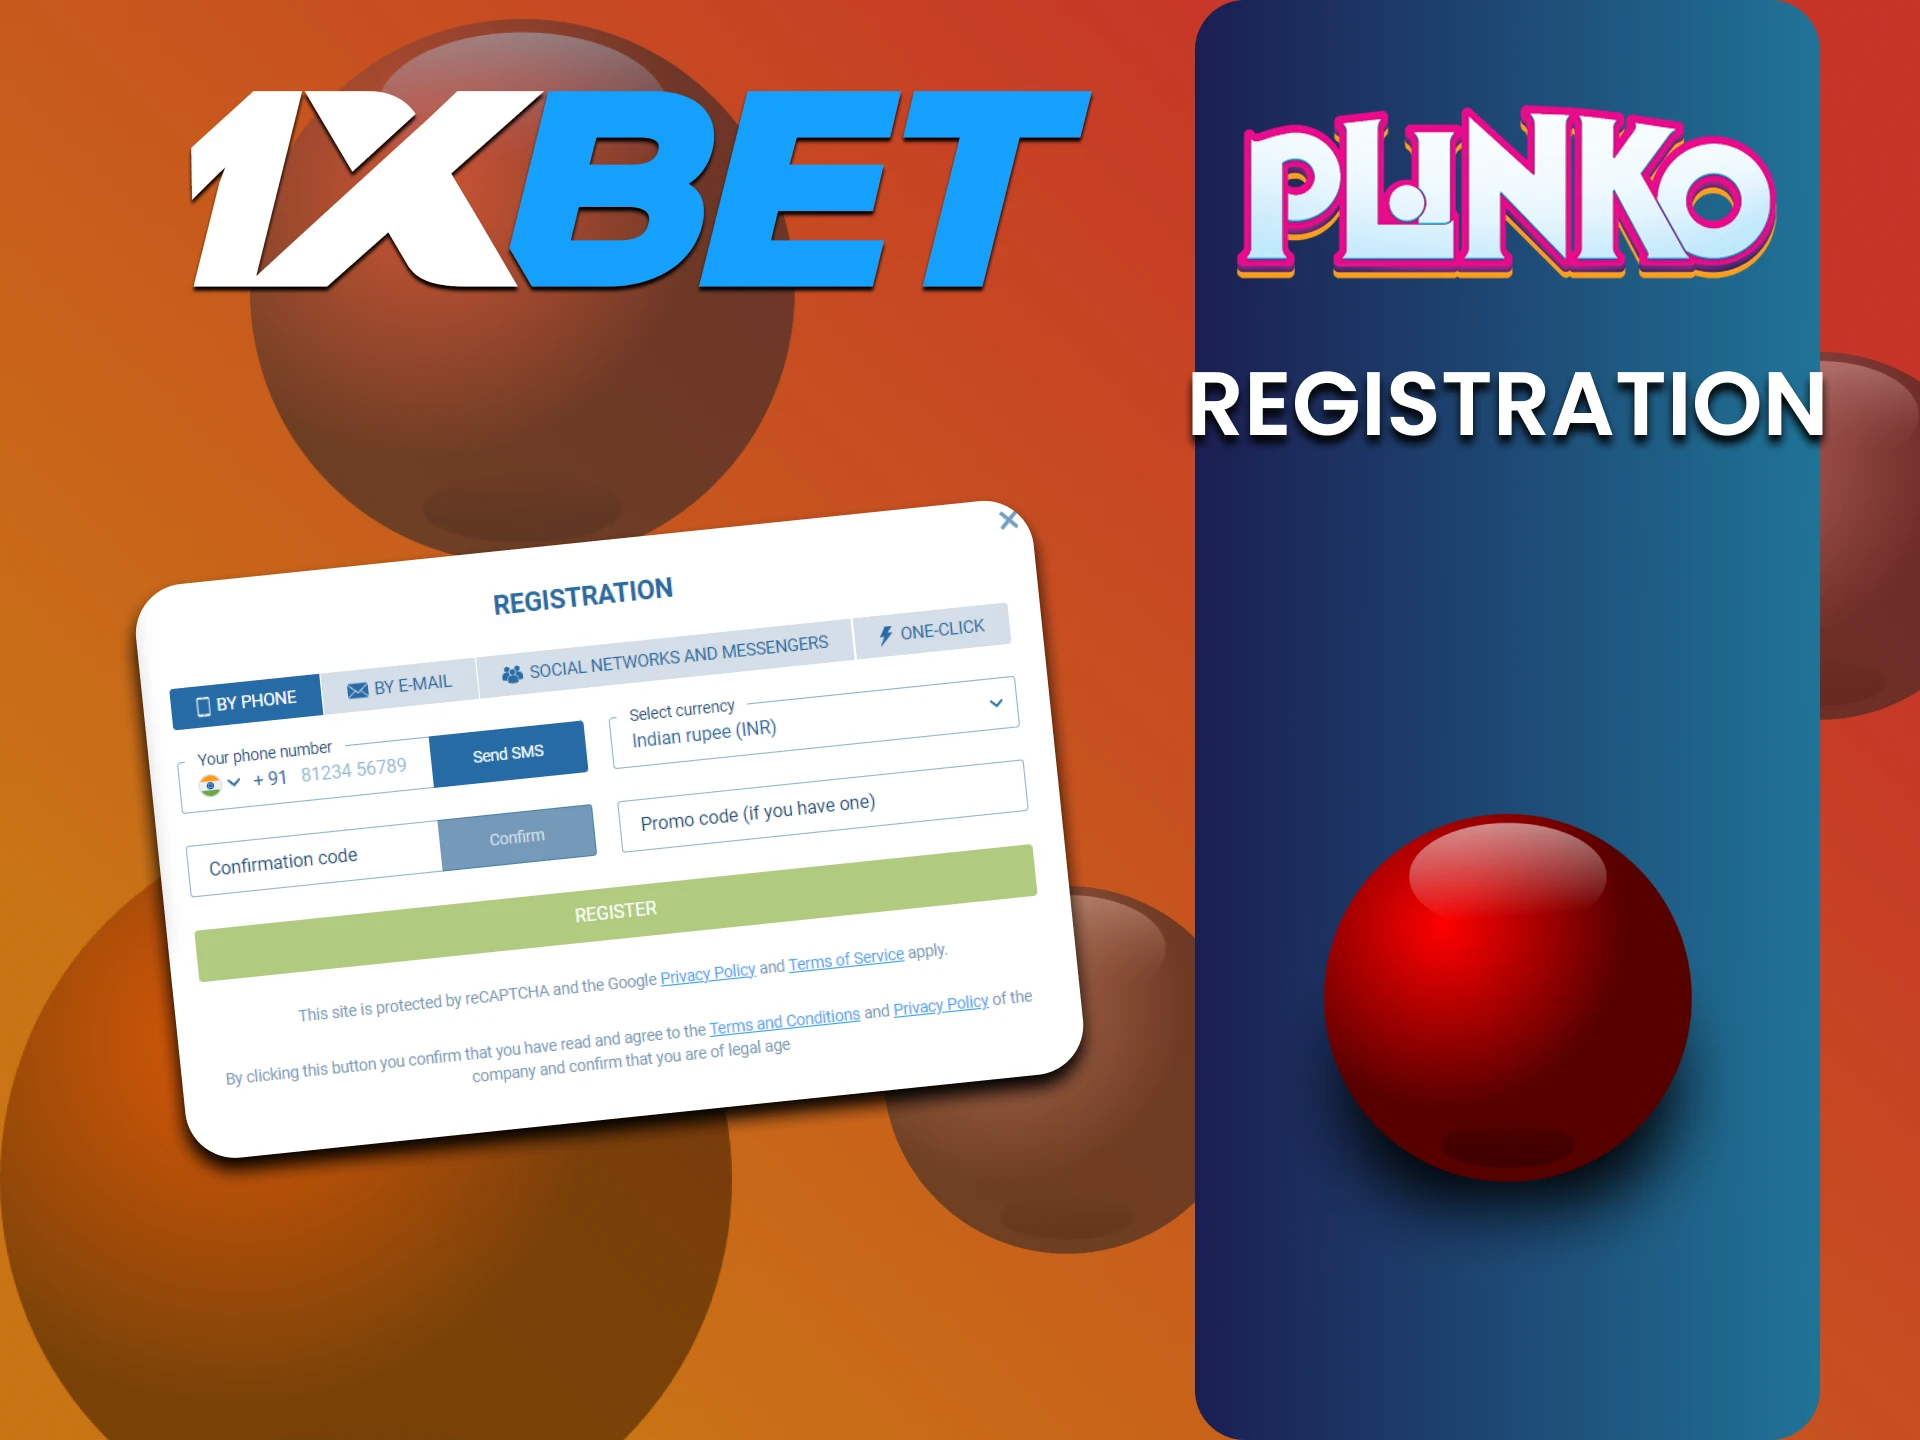 Find out how to register on 1xbet to play Plinko.